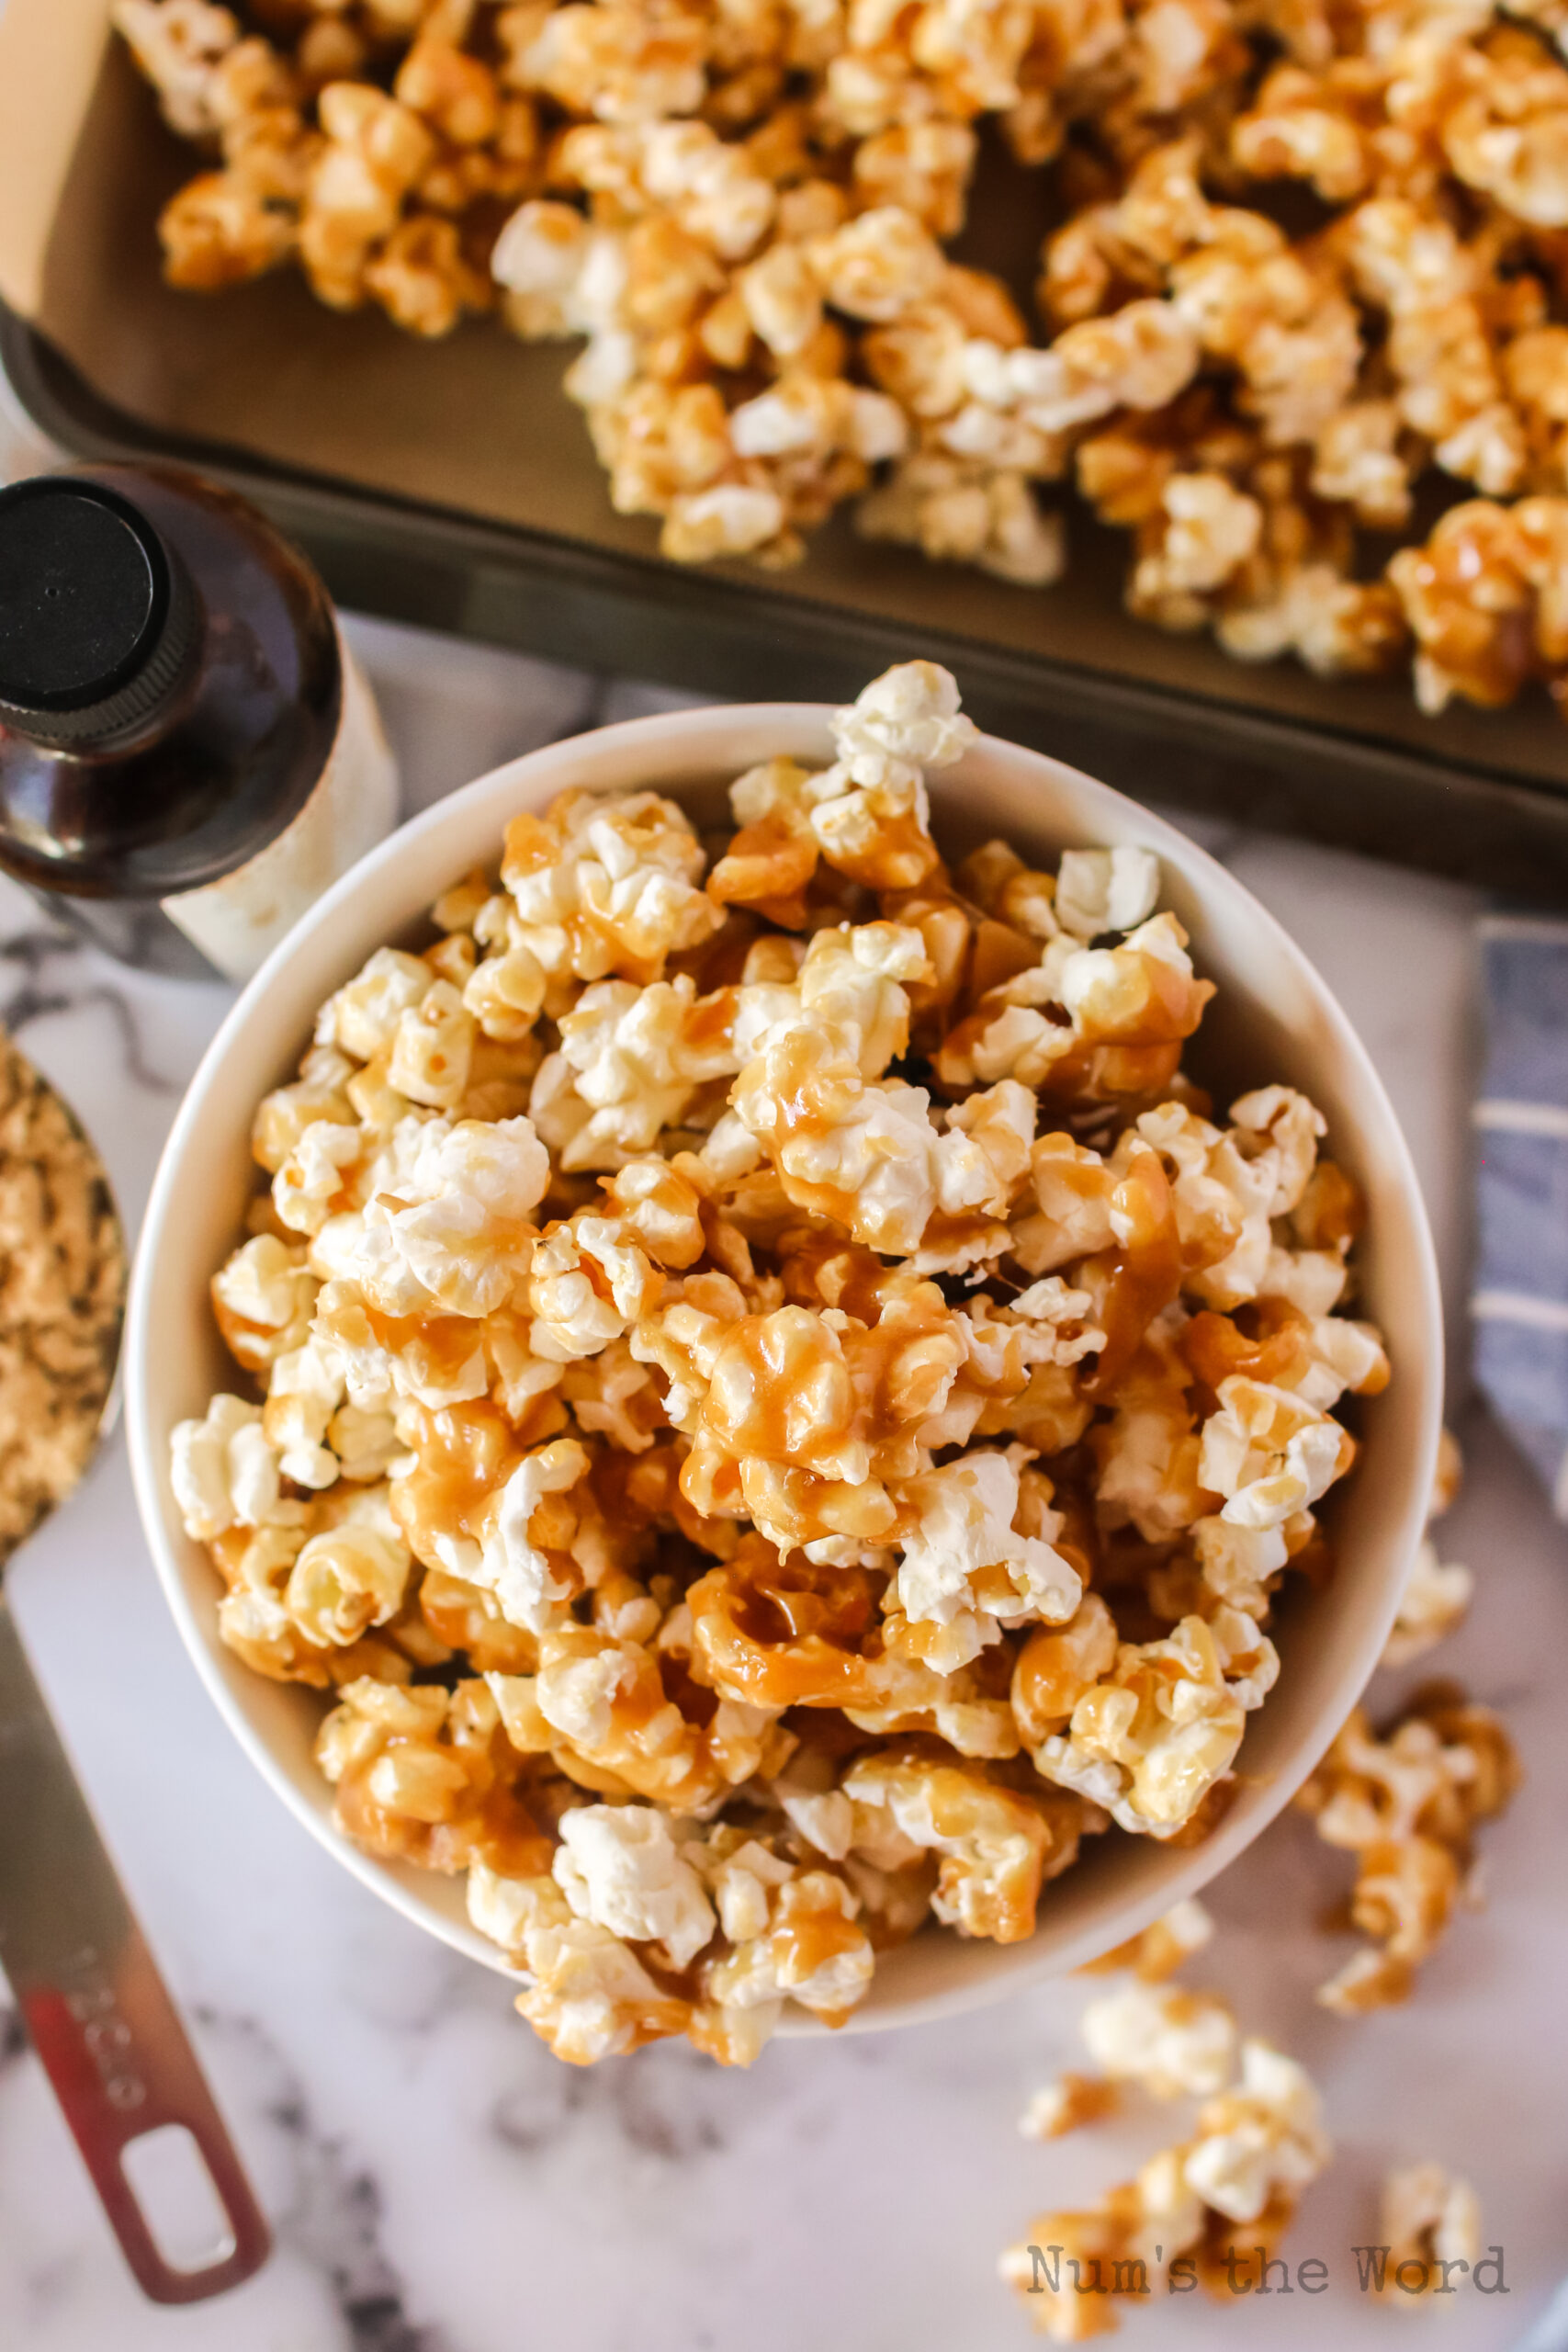 baked caramel corn in a bowl, ready to eat